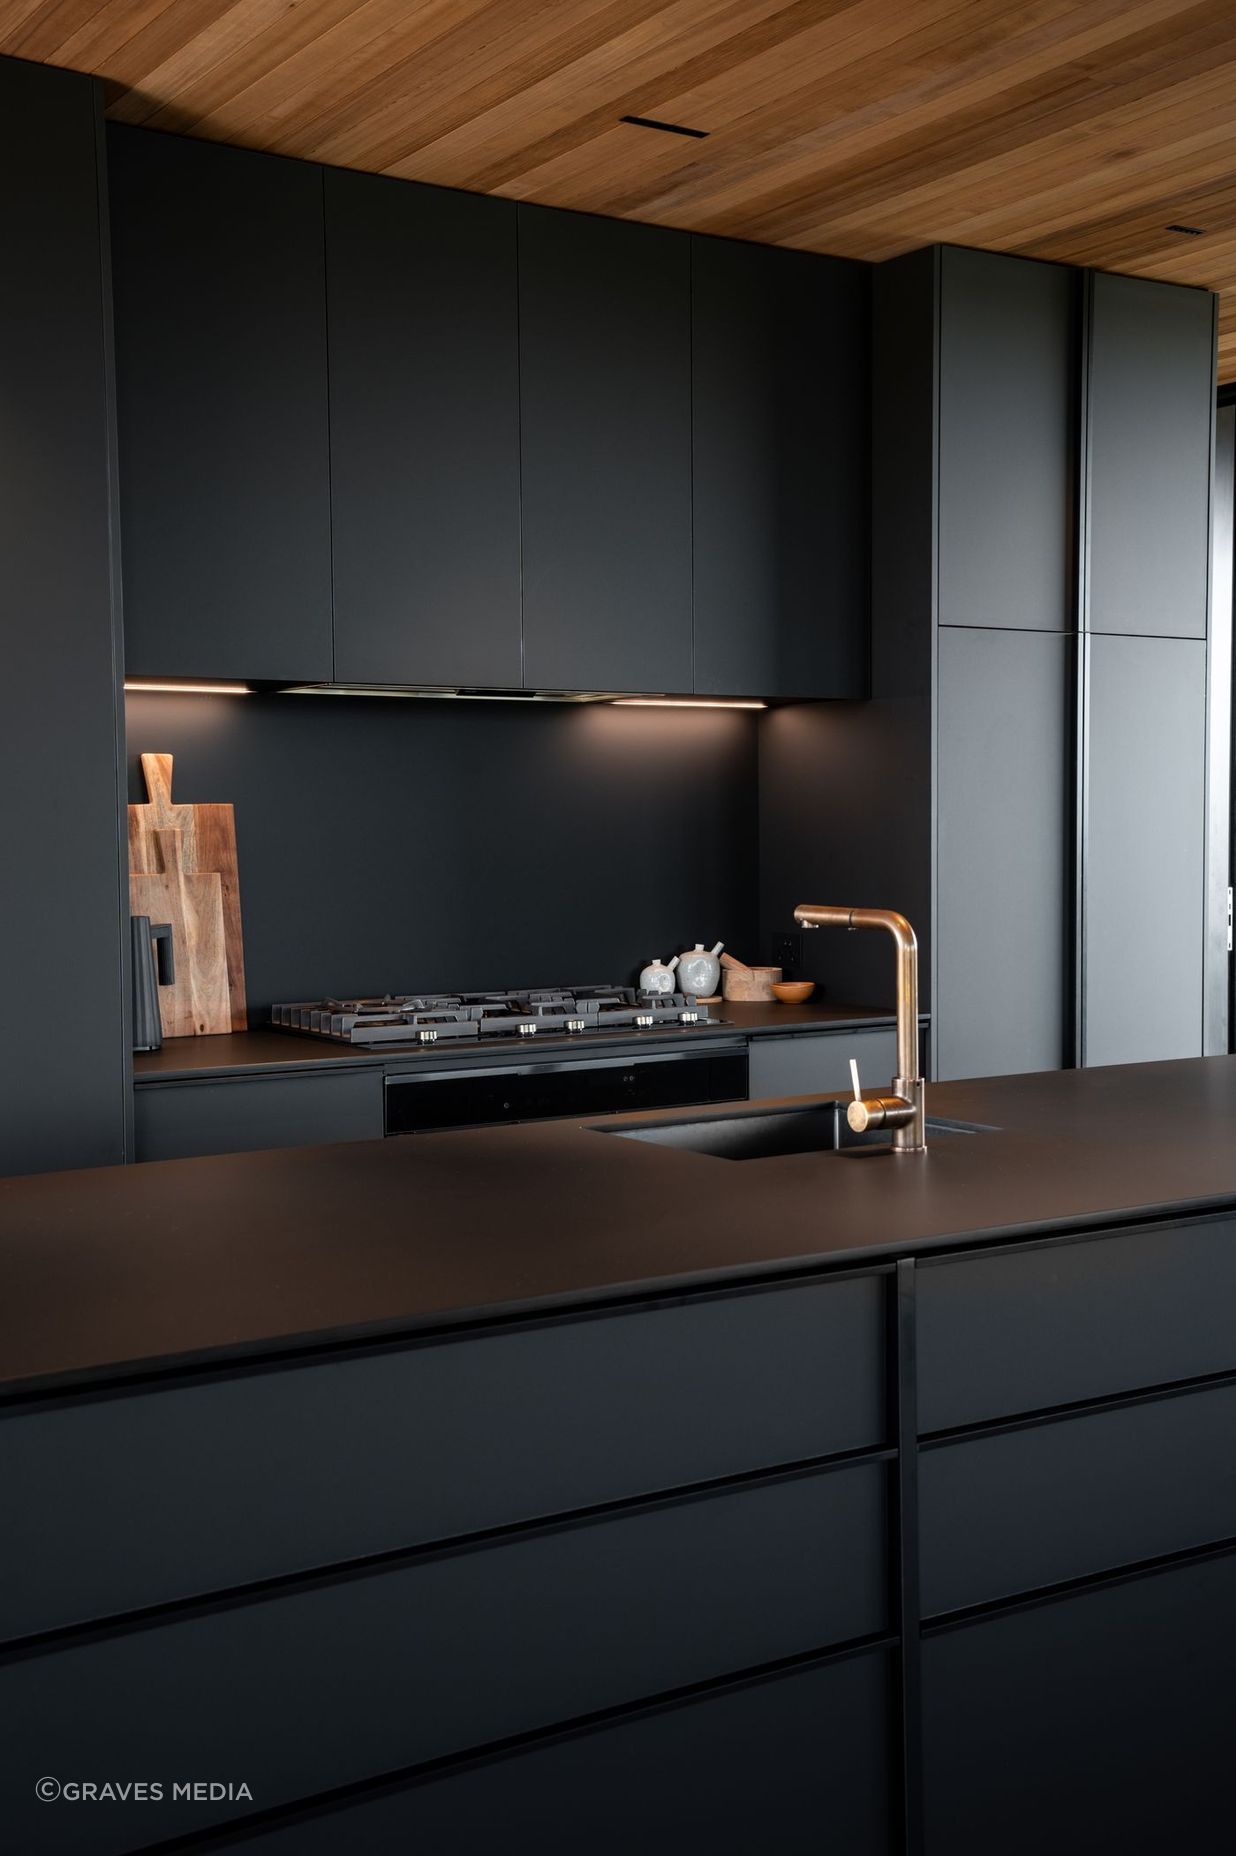 The kitchen's sleek, monotone scheme adds to the seamless aesthetic of the space.